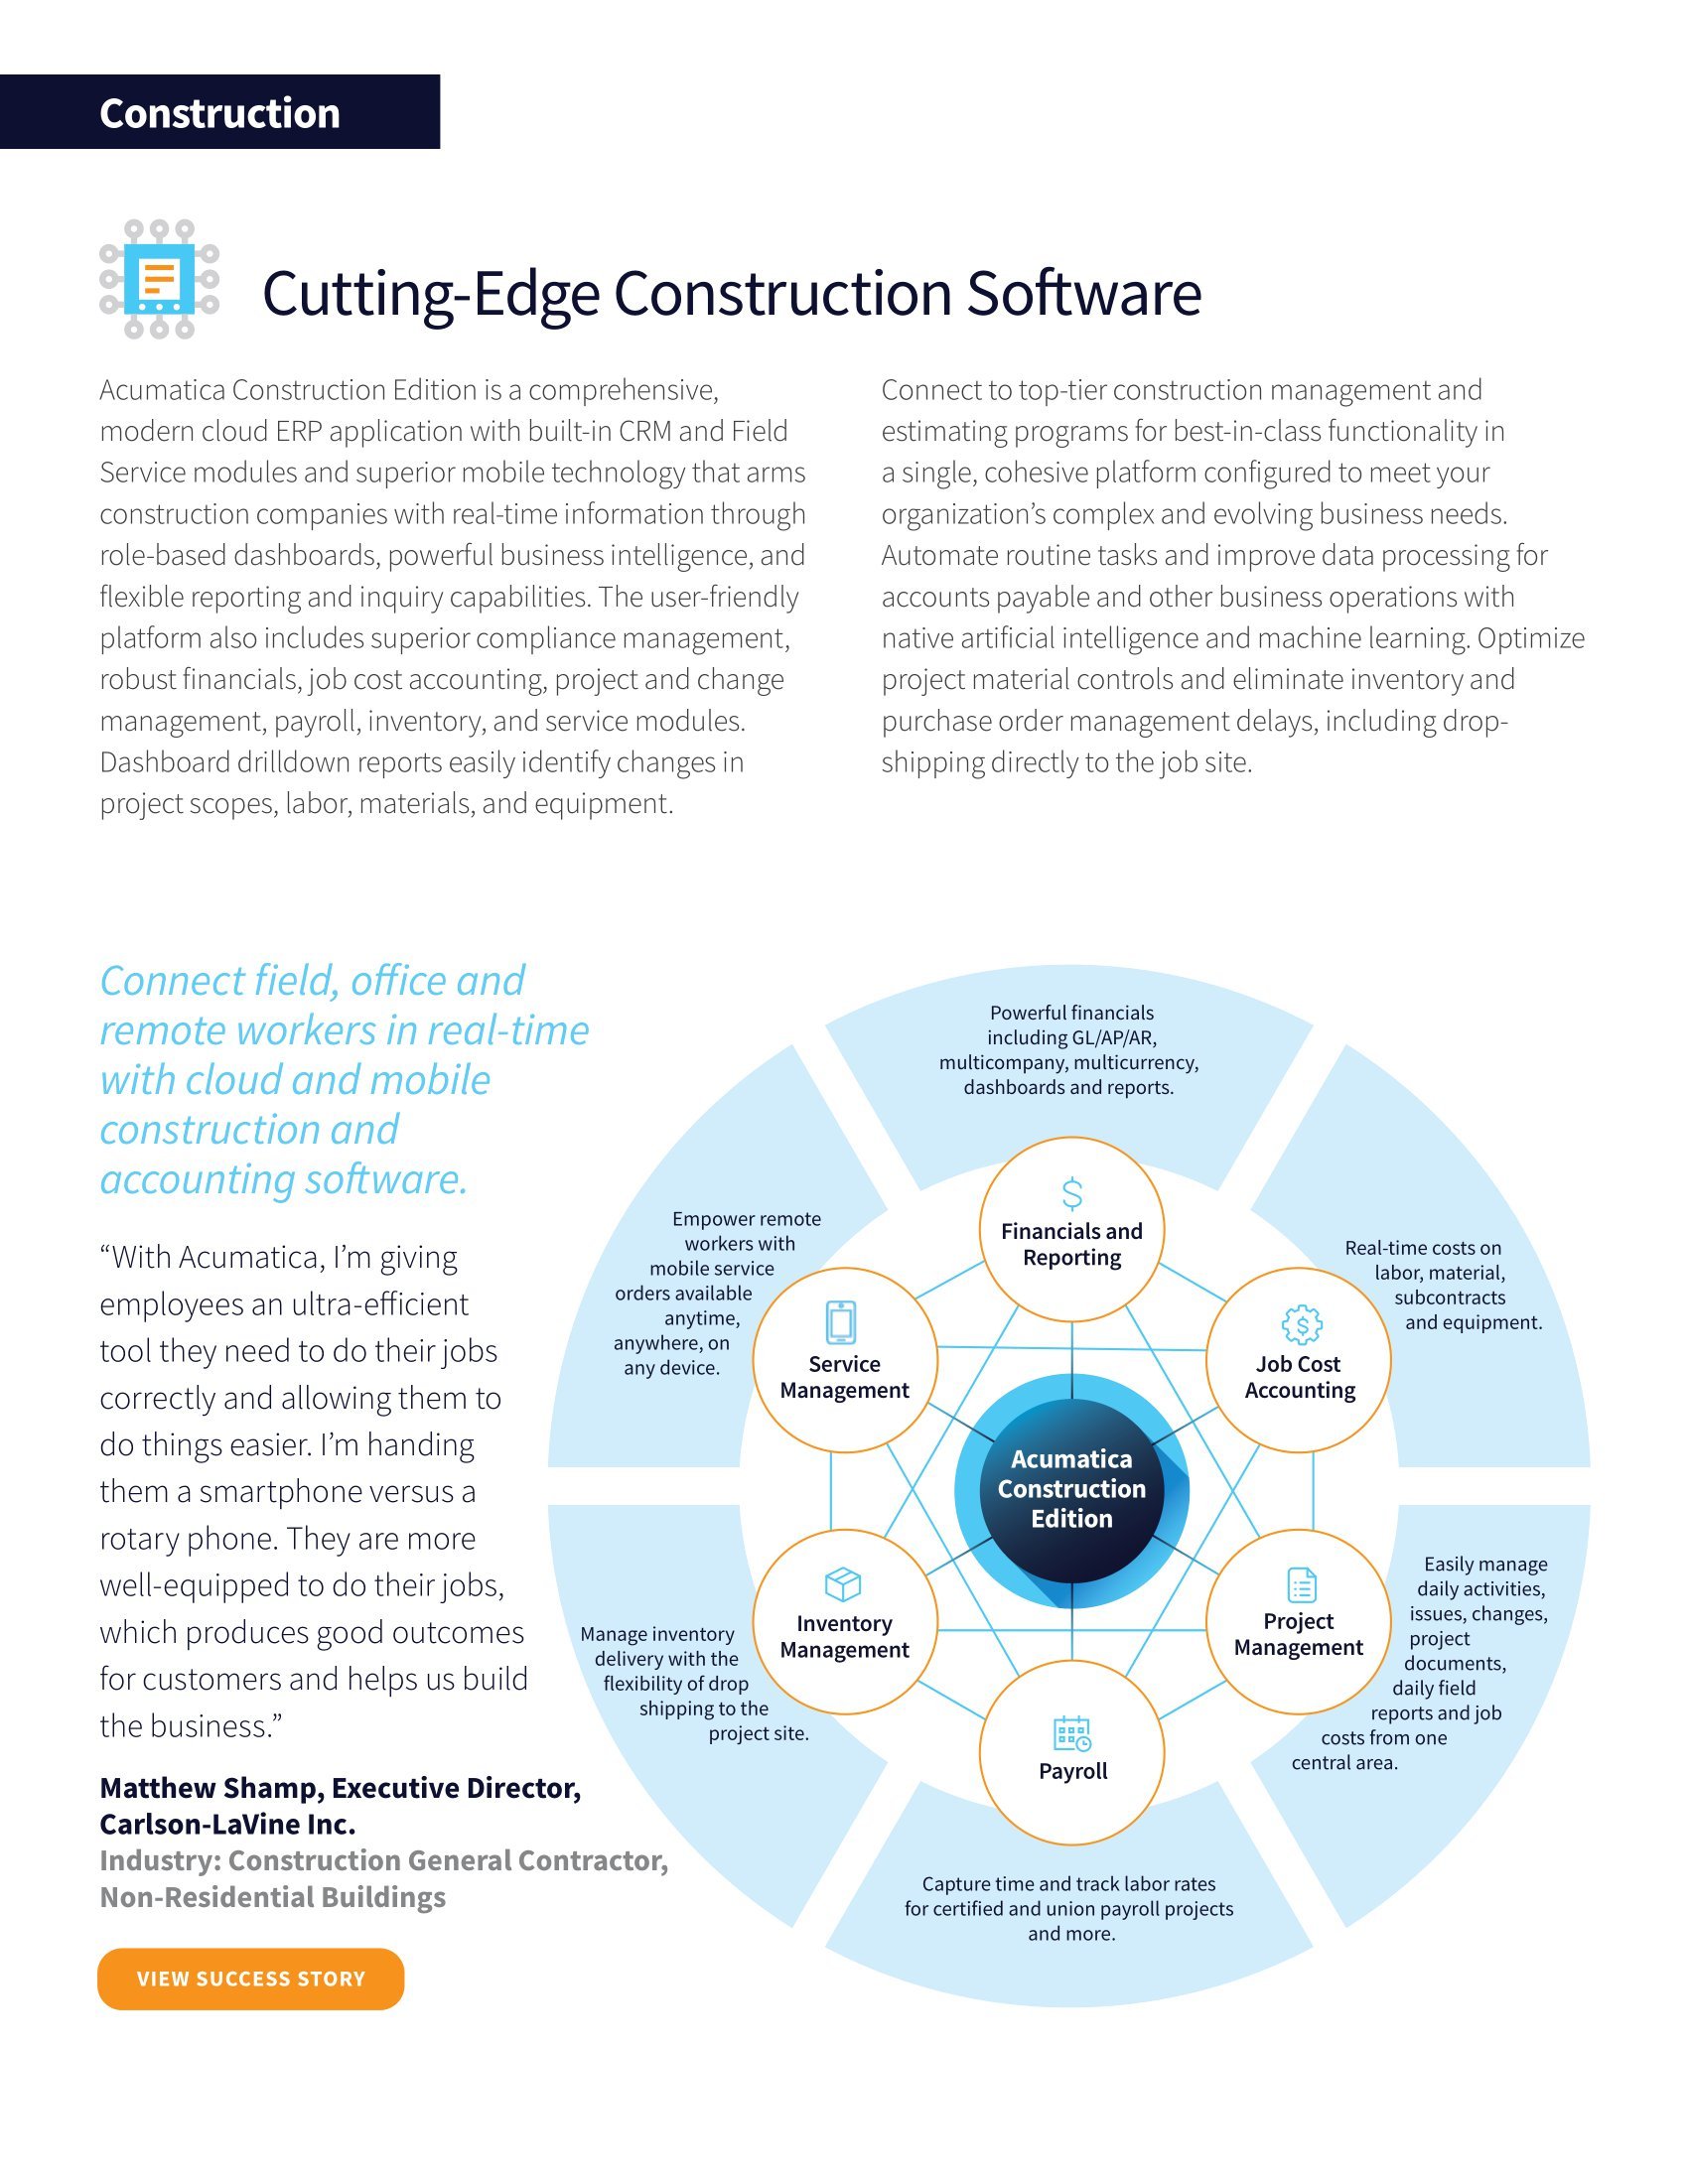 Acumatica Construction Edition:  A Complete ERP Solution to Meet All of Your Needs, page 1